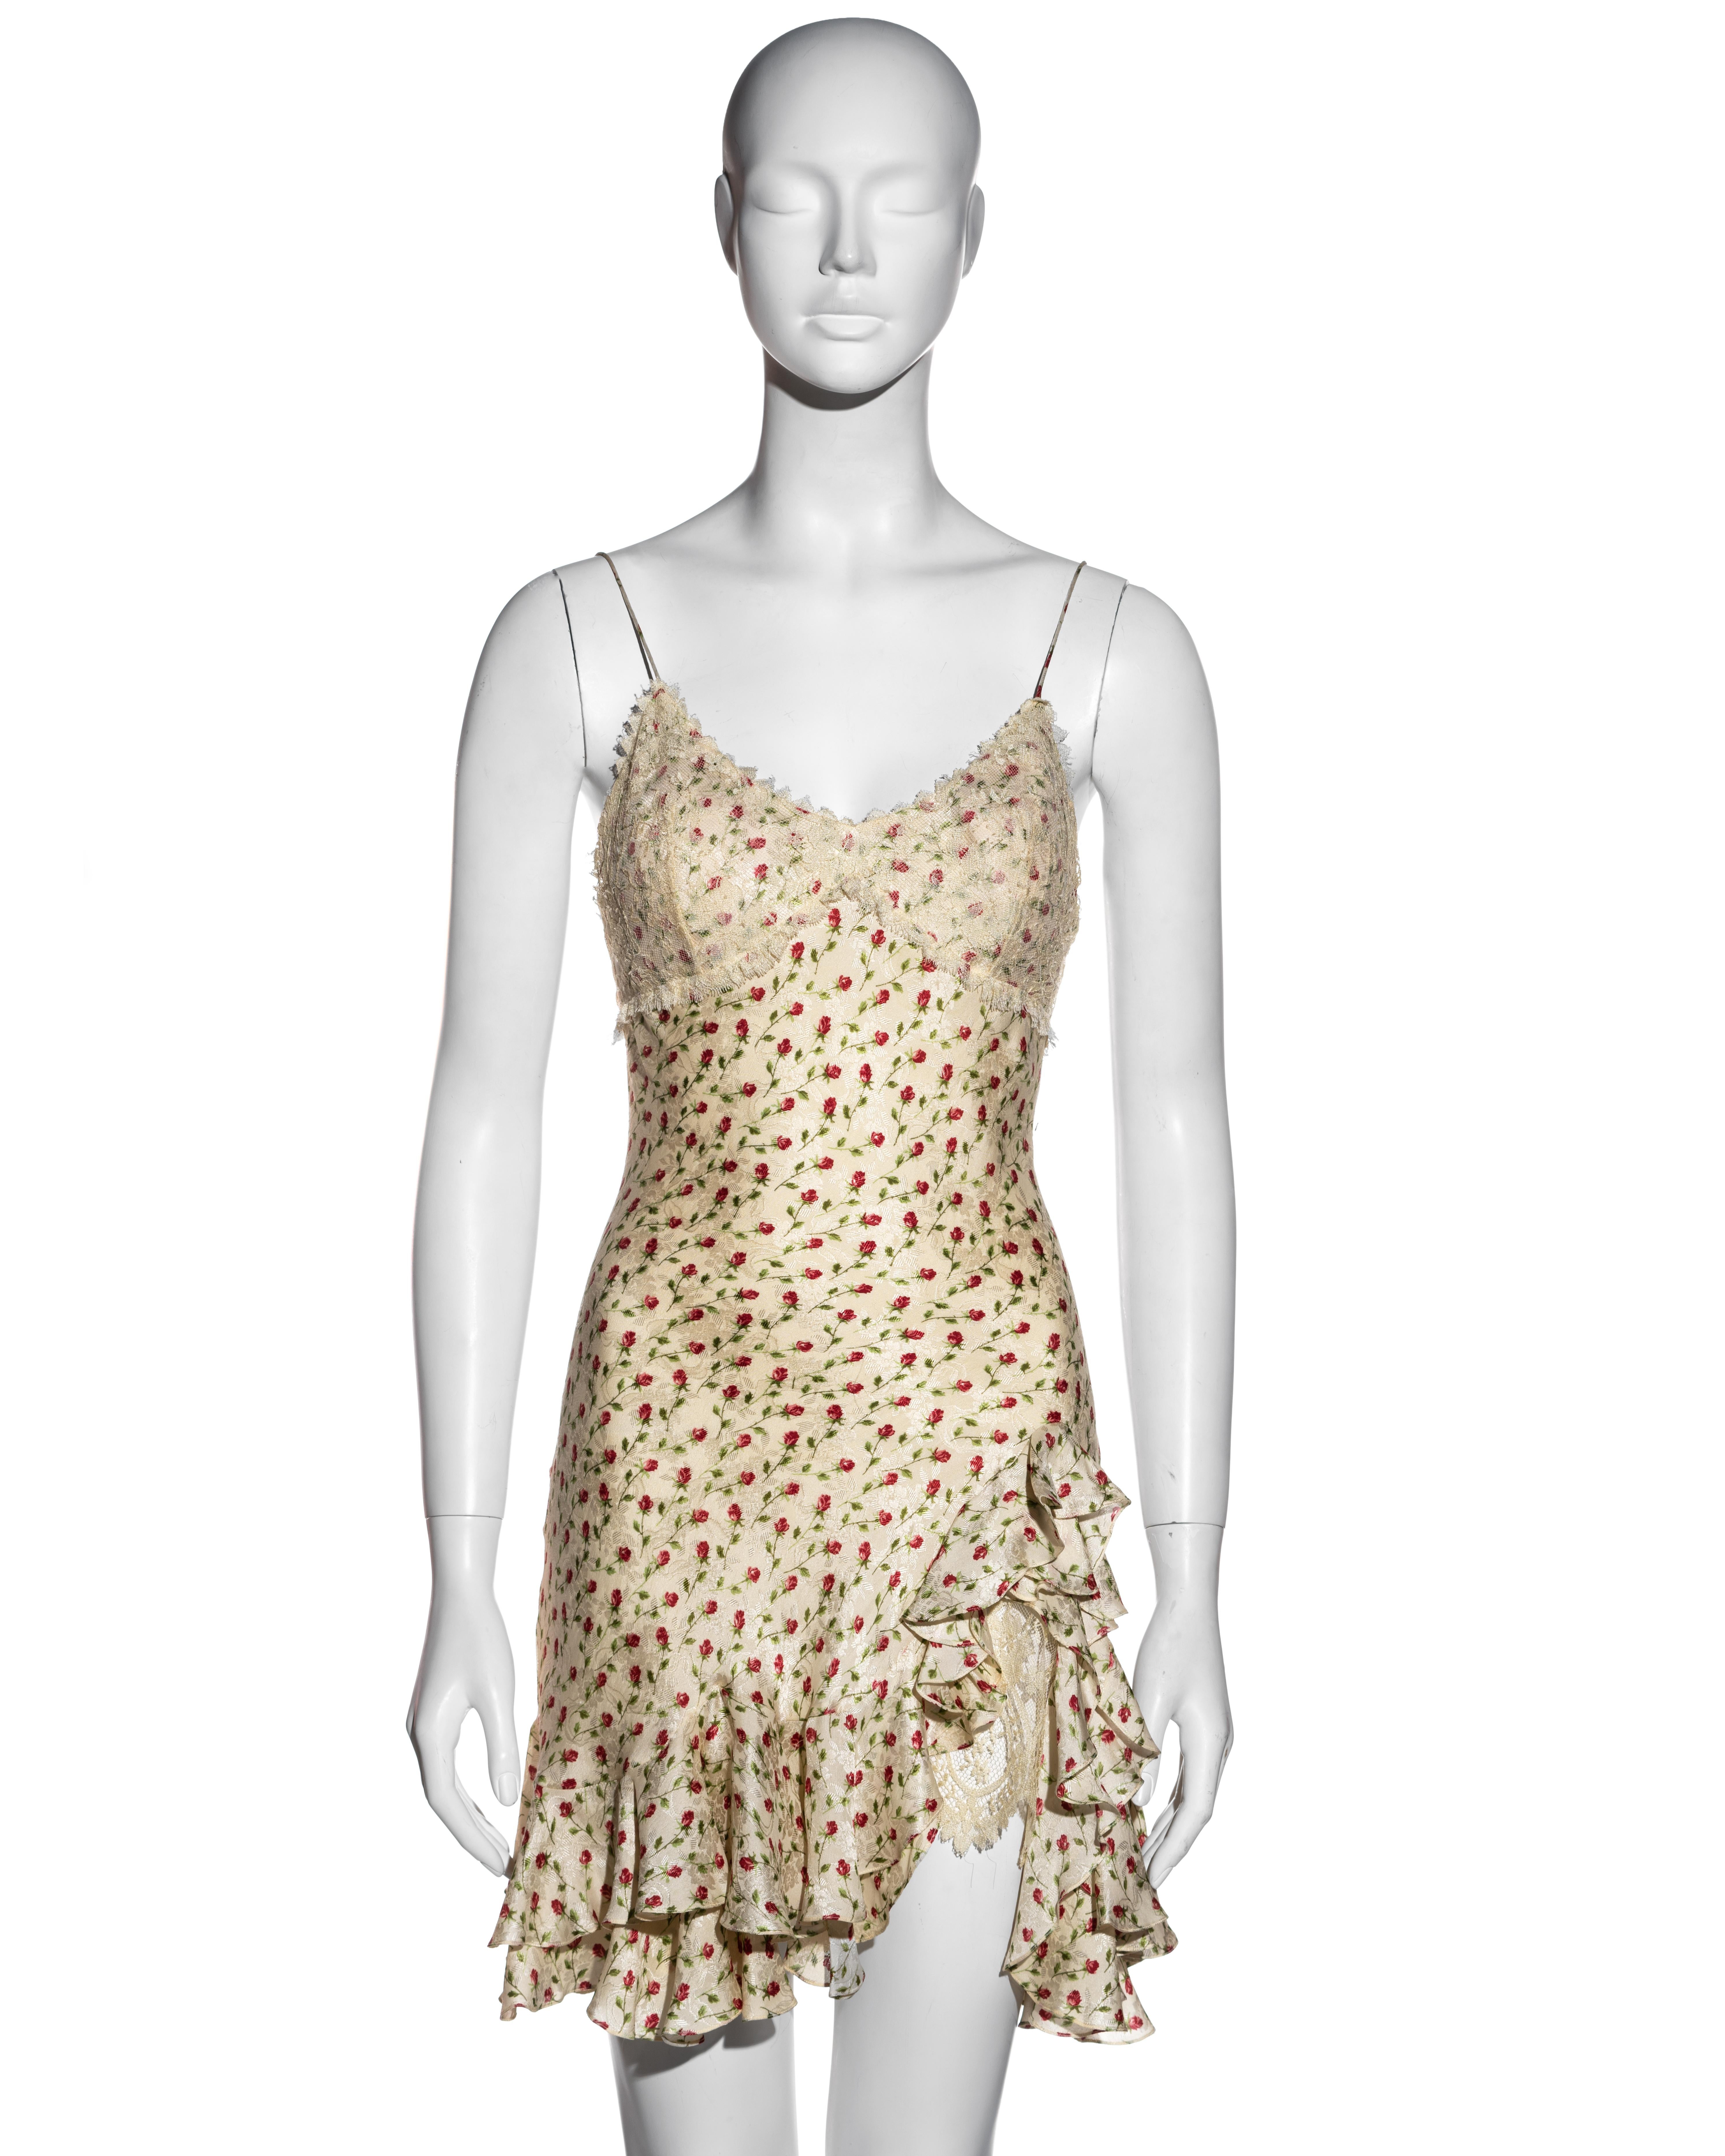 ▪ John Galliano ivory silk jacquard mini slip dress
▪  Red rose print 
▪ Padded breast cups with Chantilly lace overlay 
▪ Spaghetti straps 
▪ Bias-cut 
▪ Flounce mini skirt with two layers 
▪ High leg slit with Chantilly lace underlay 
▪ Silk